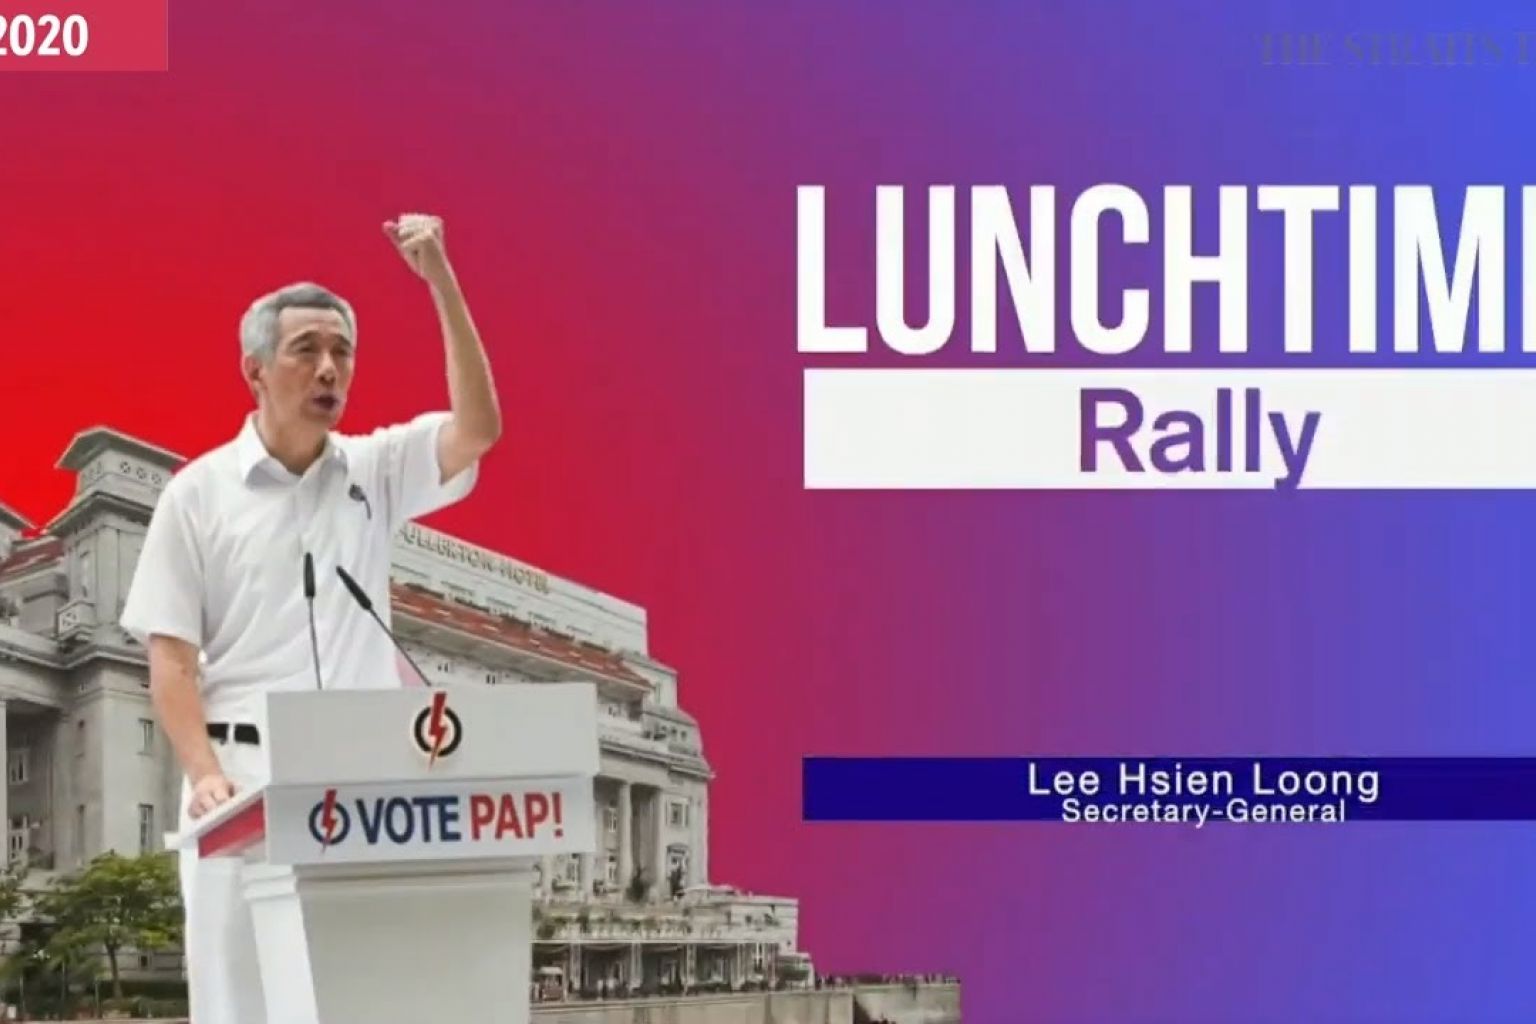 PM Lee speaks at lunchtime rally | Peopleâ€™s Action Party | GE2020 (July 6)